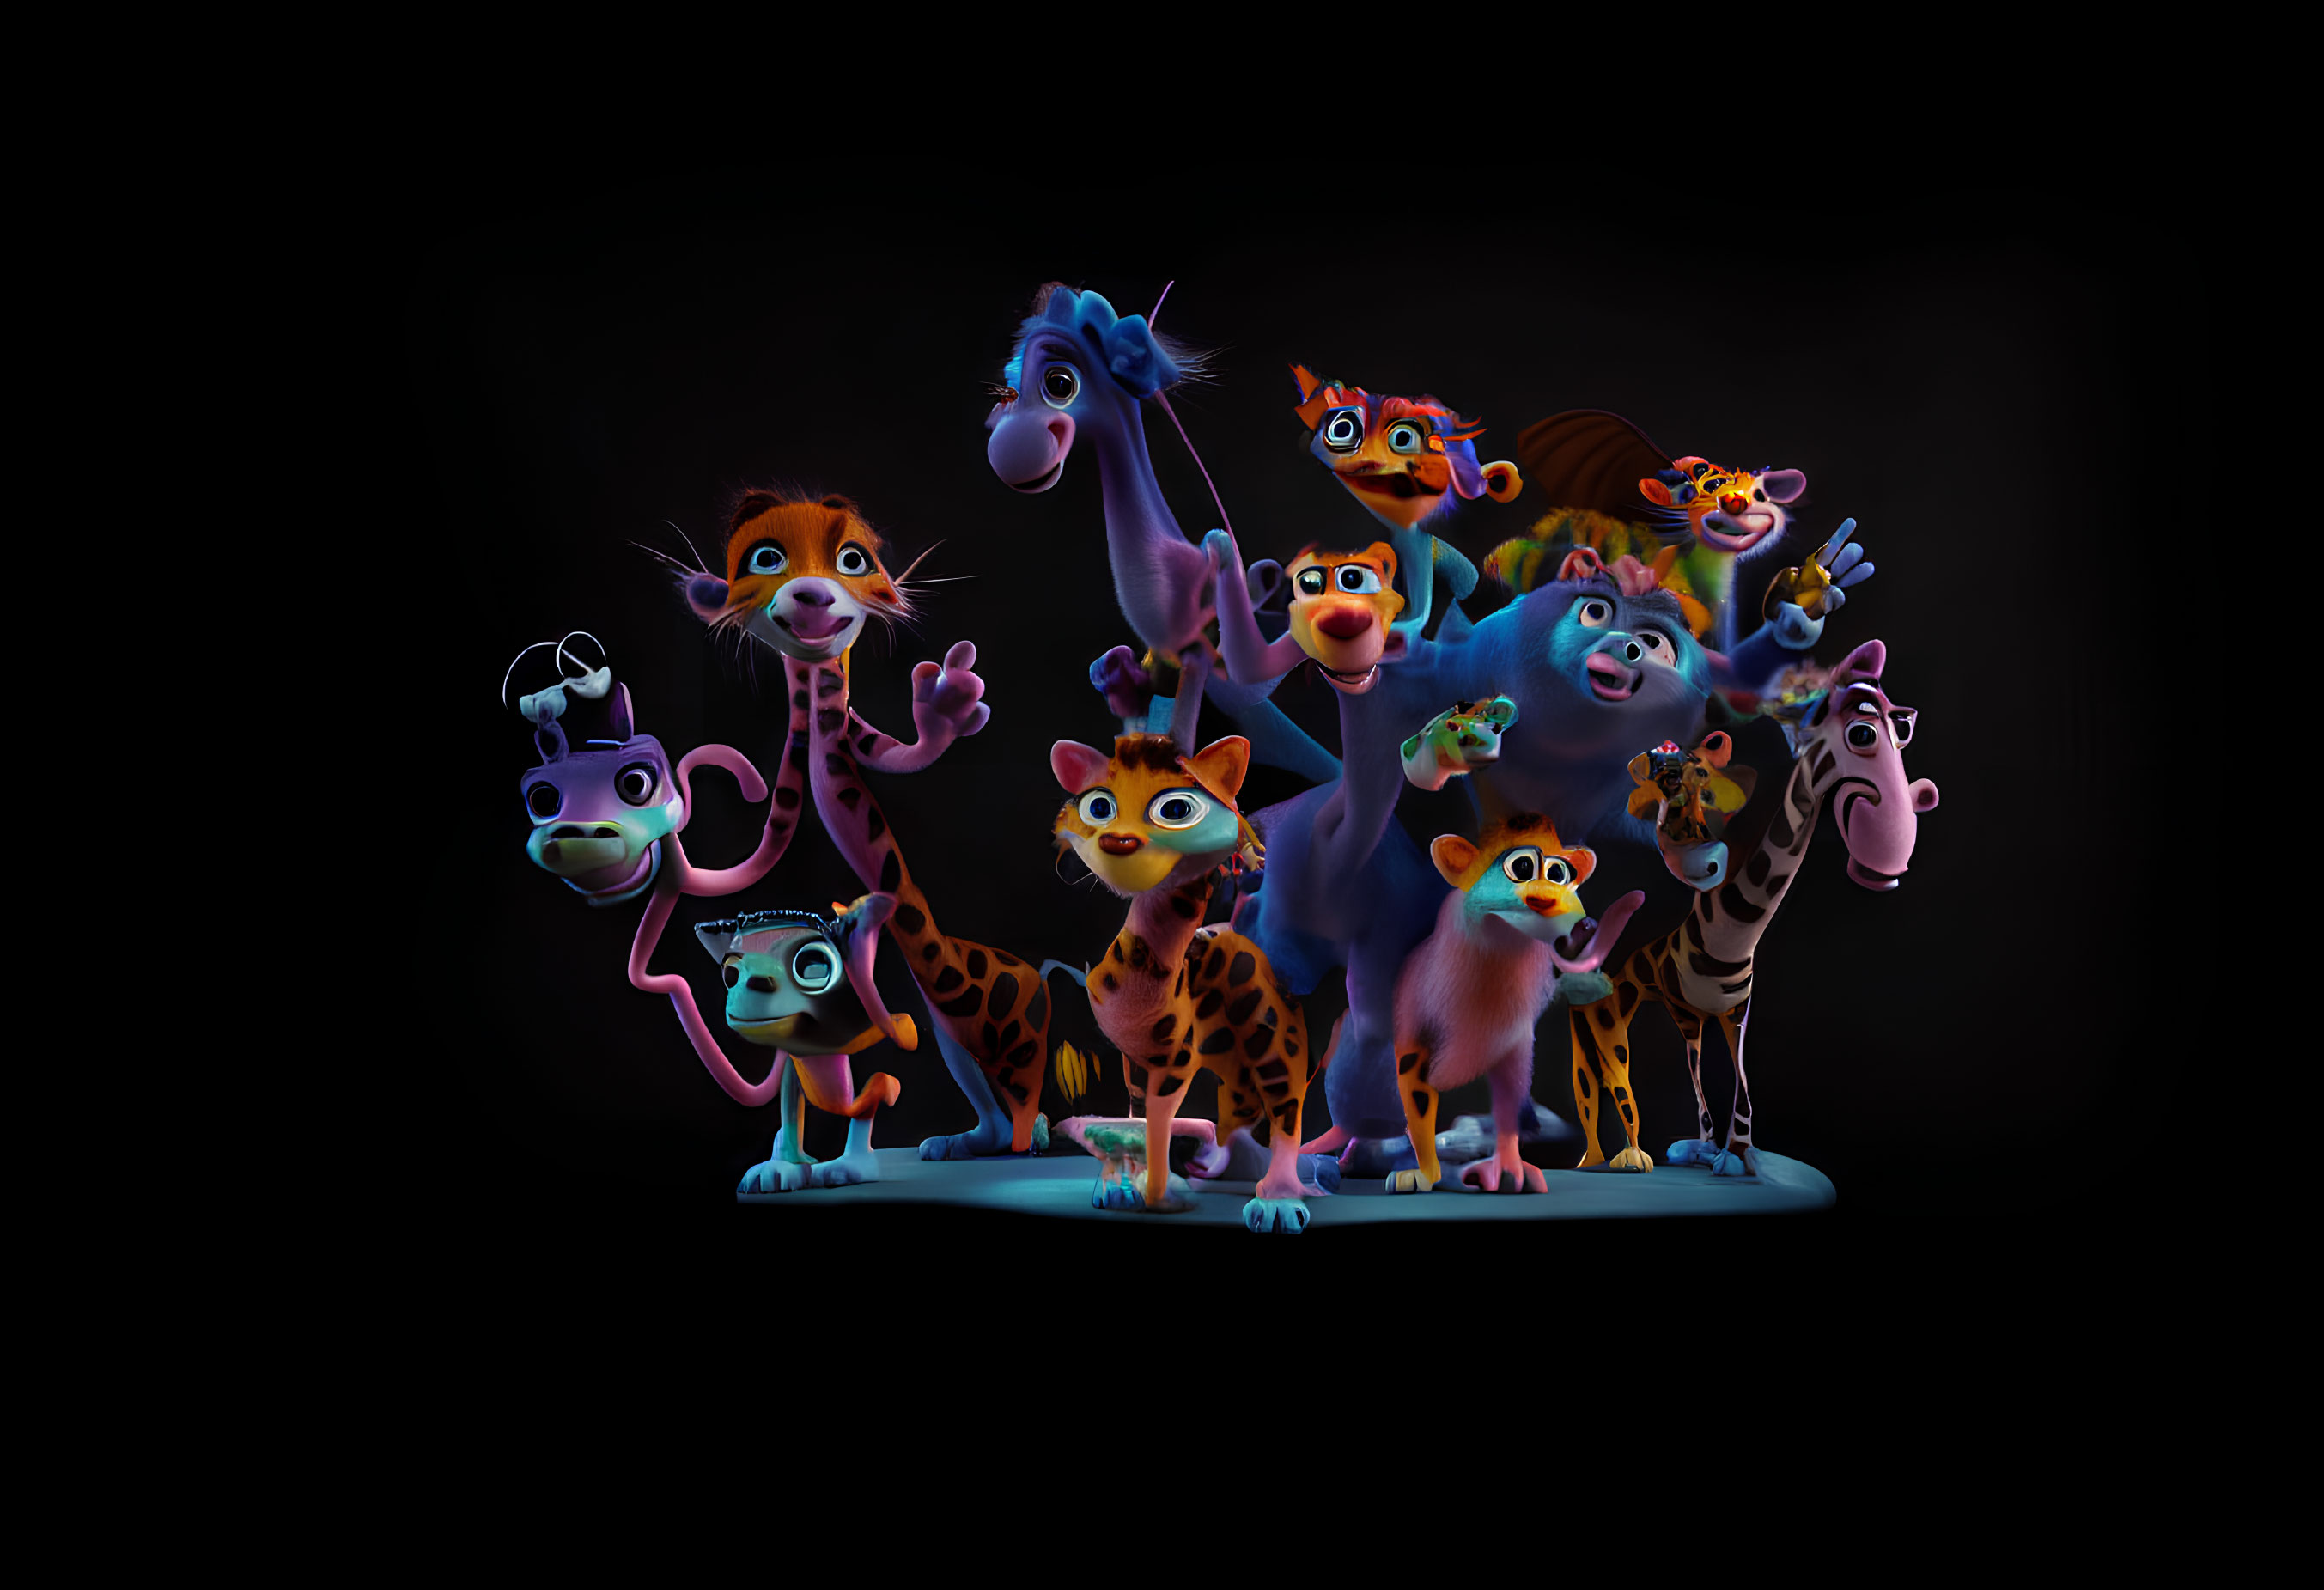 Vibrant Cartoon Animals with Exaggerated Features on Black Background